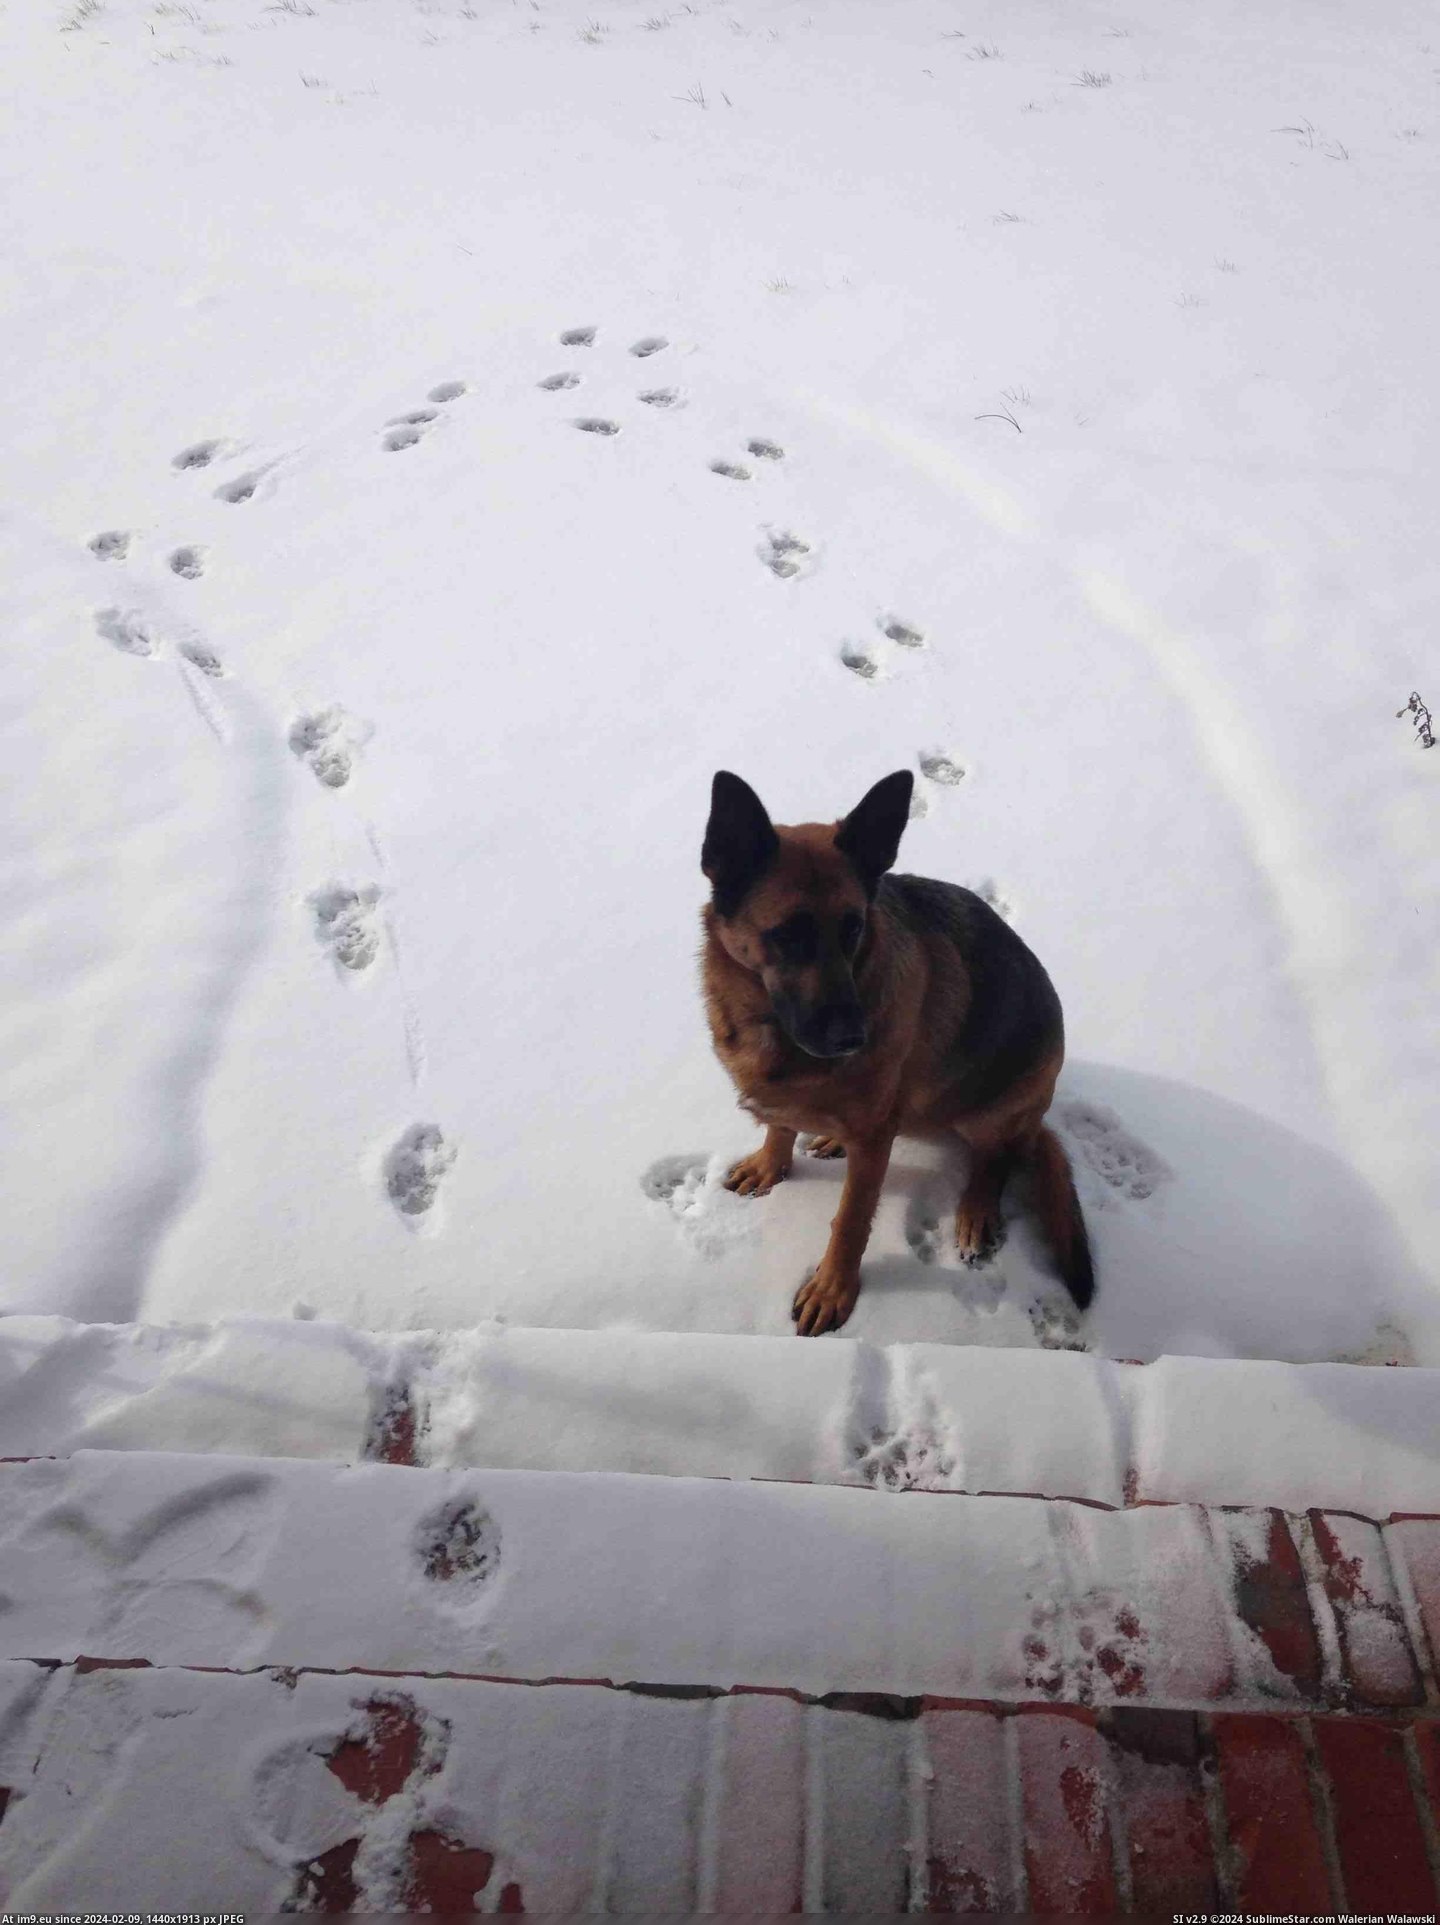 #Time #Dog #Instant #Snow #Nope [Aww] my dog's first time seeing snow....instant 'NOPE' Pic. (Изображение из альбом My r/AWW favs))